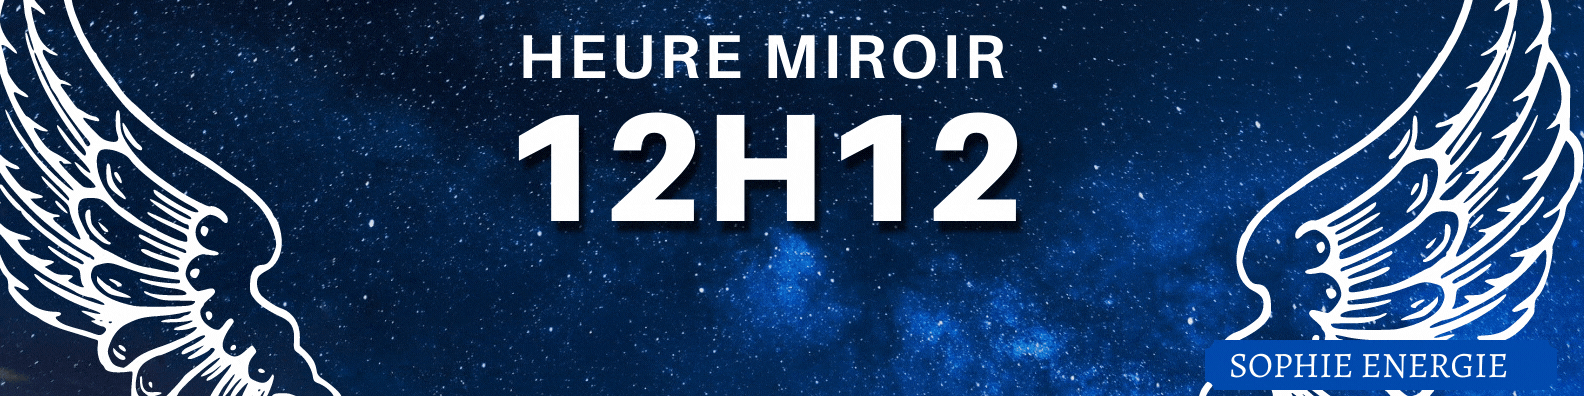 HEURE MIROIR anges 12h12